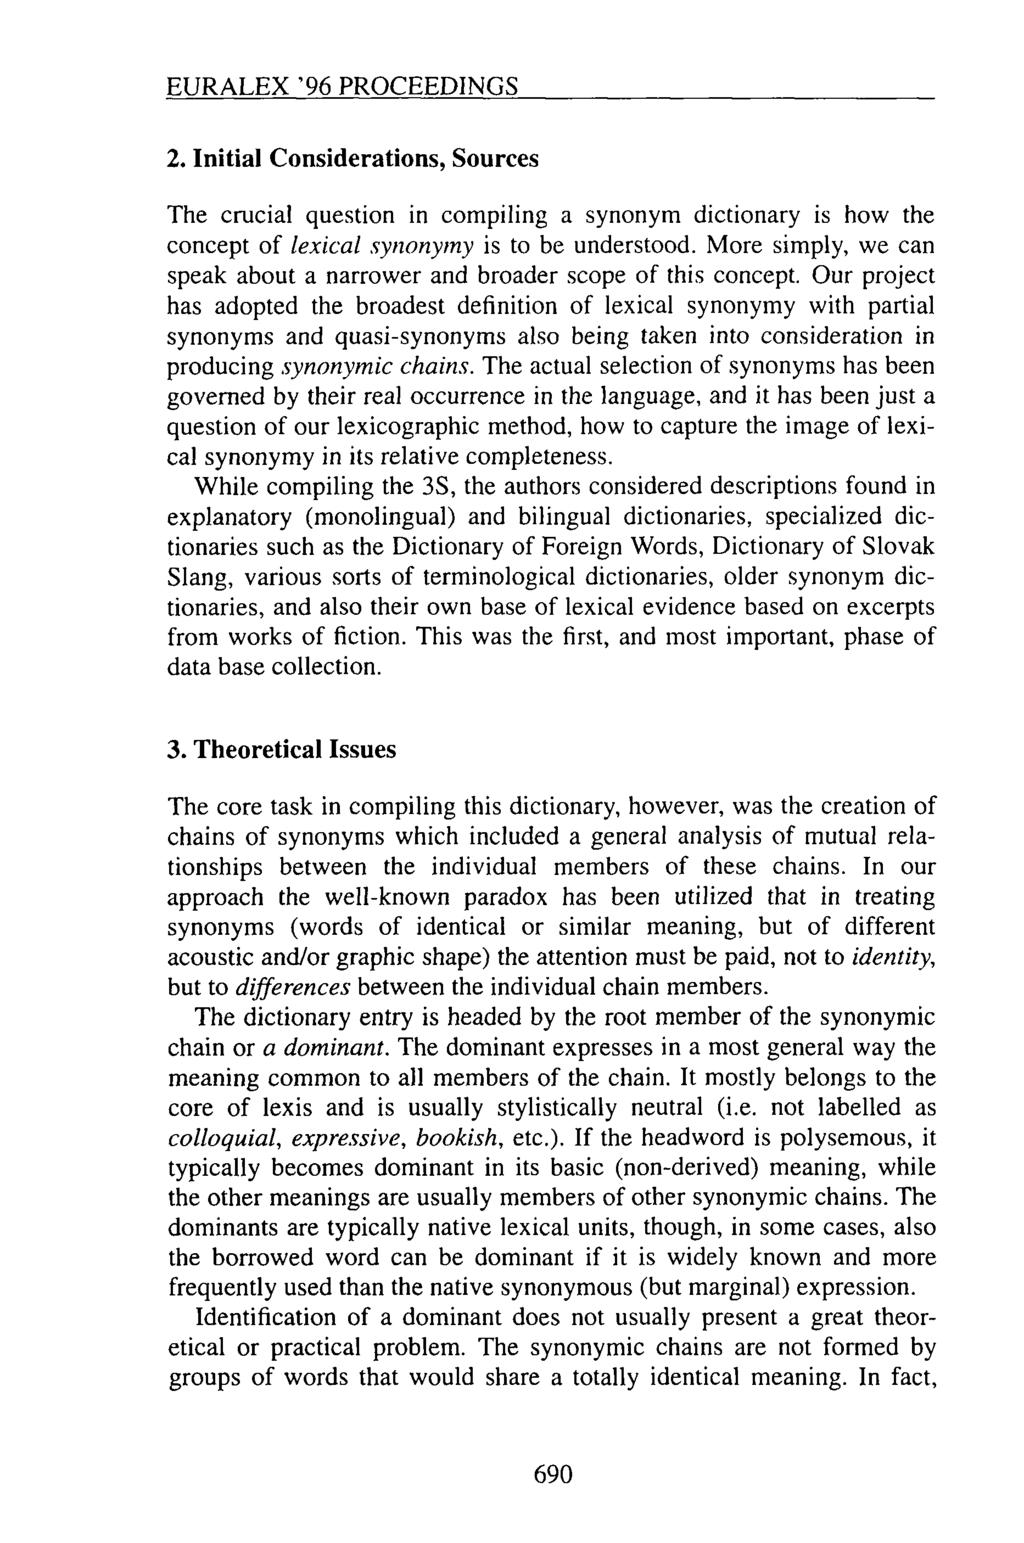 EURALEX '96 PROCEEDINGS 2. Initial Considerations, Sources The crucial question in compiling a synonym dictionary is how the concept of lexical synonymy is to be understood.